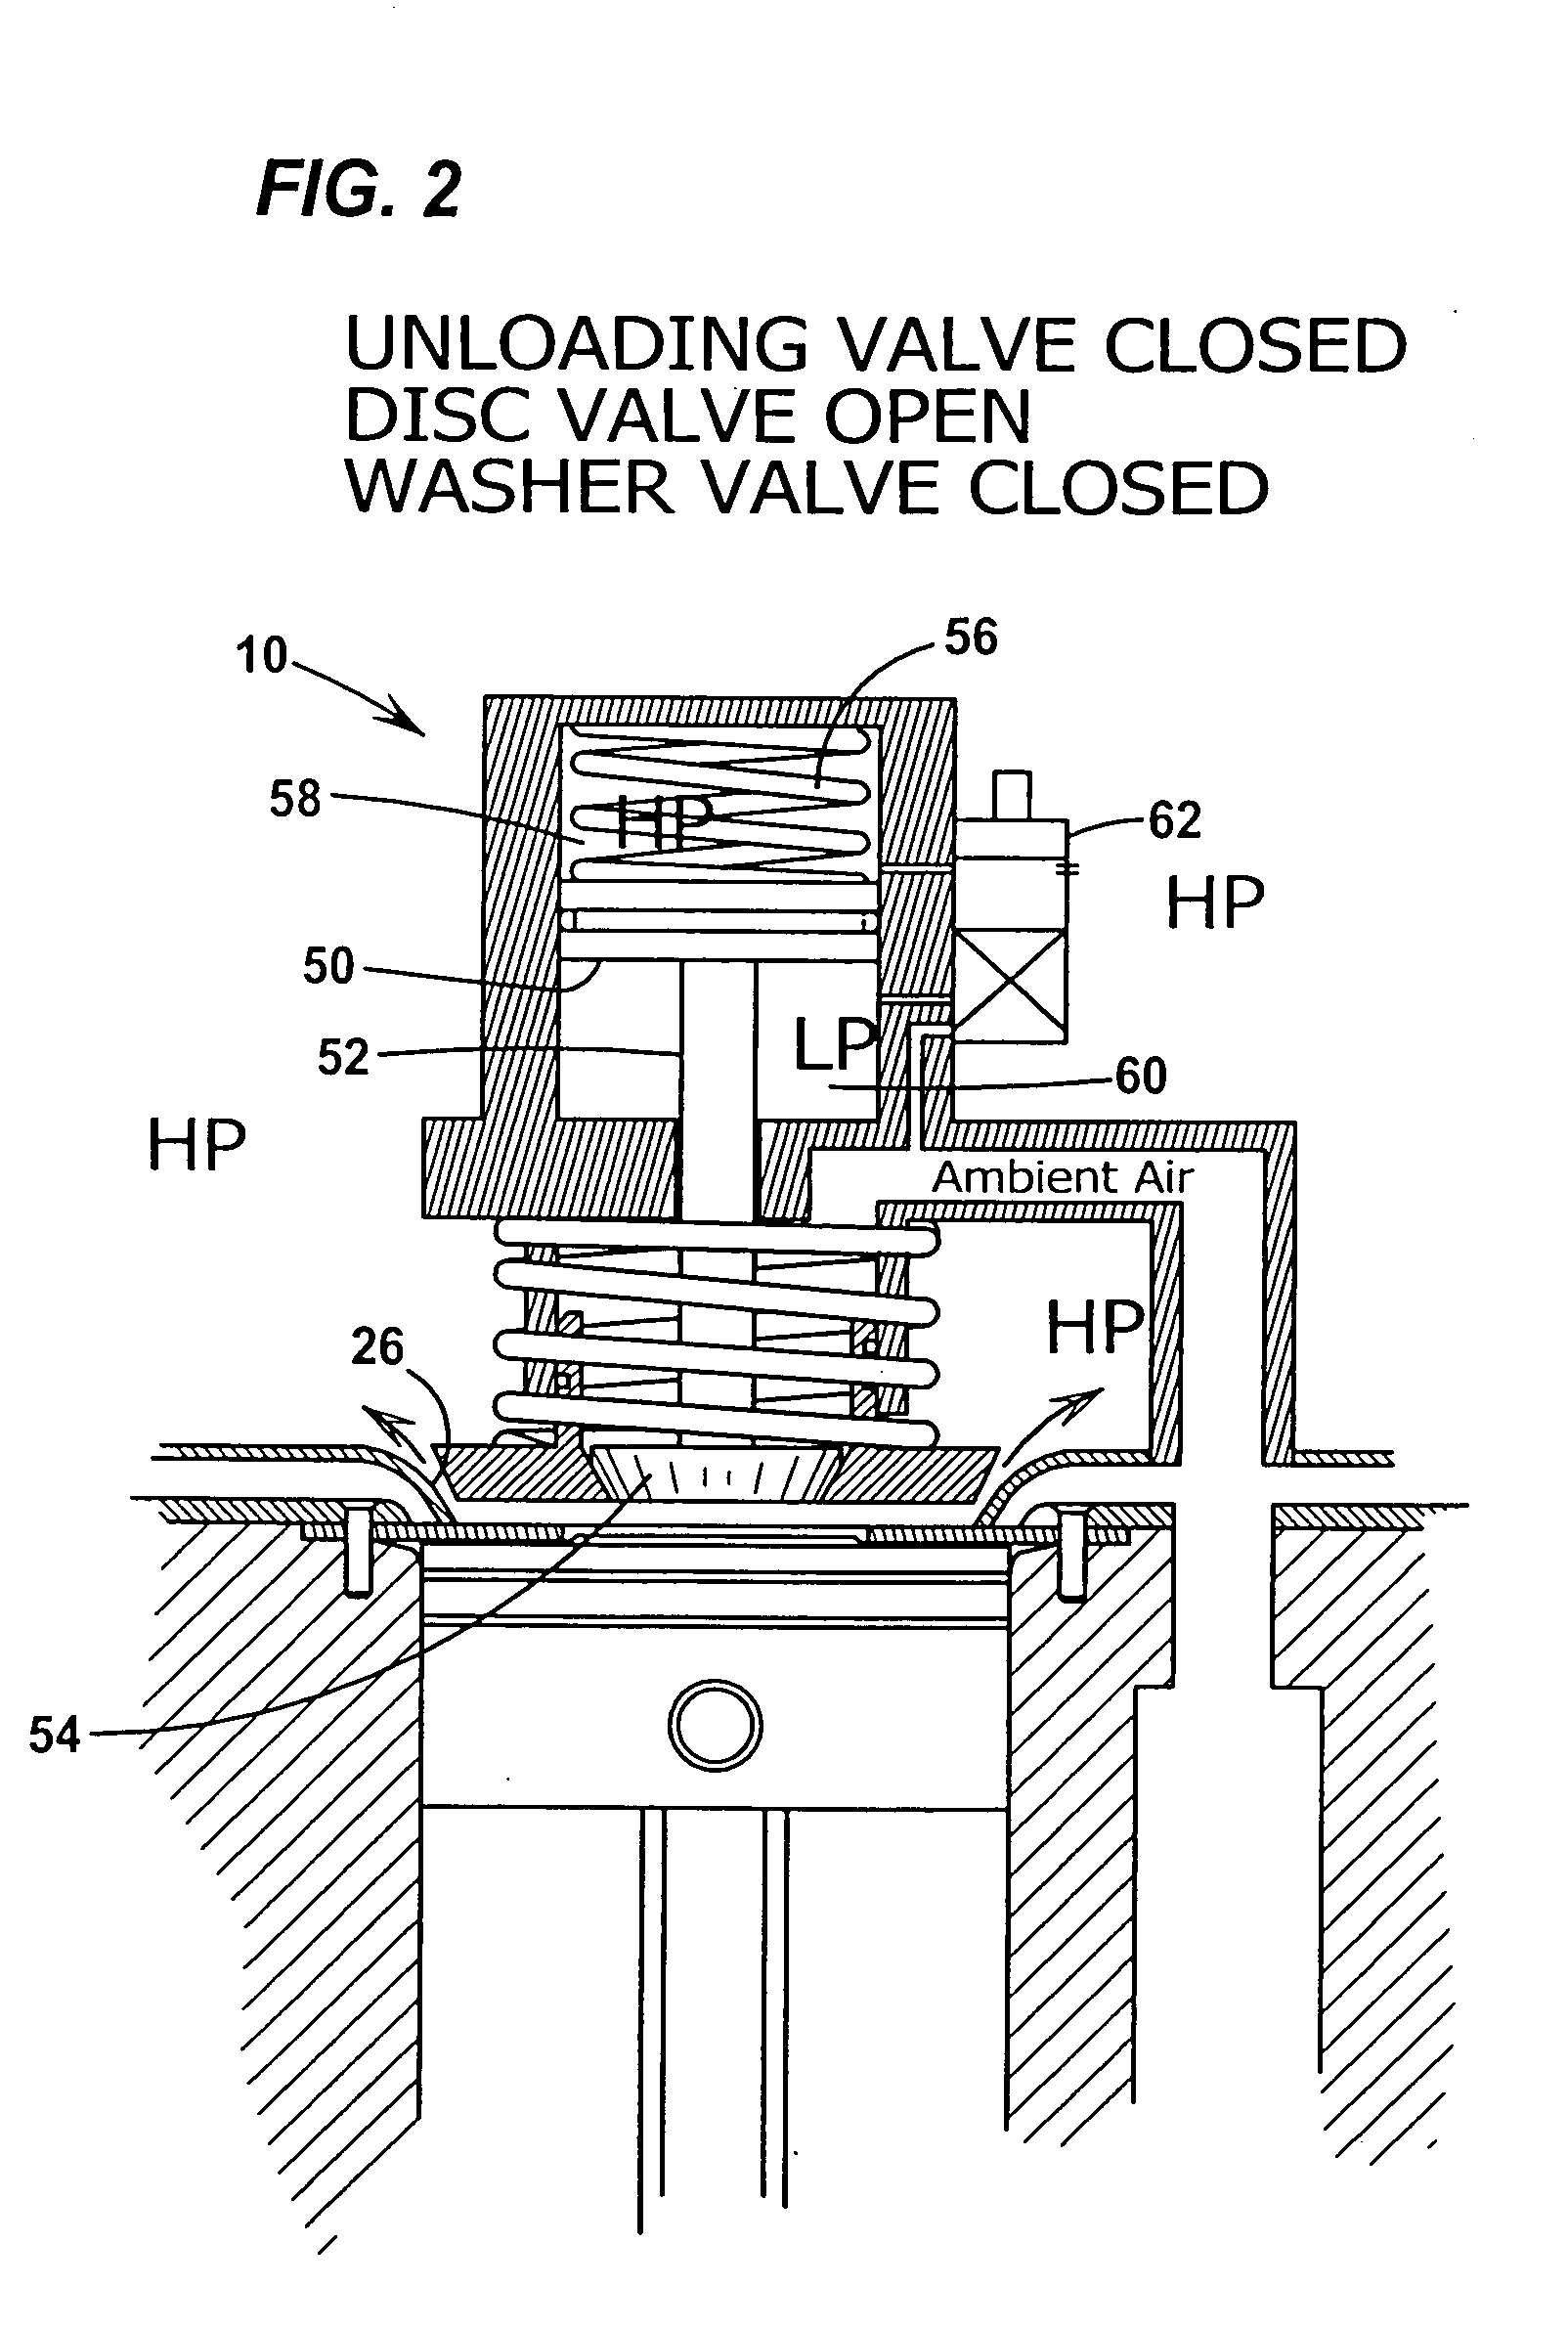 Split-cycle engine with disc valve